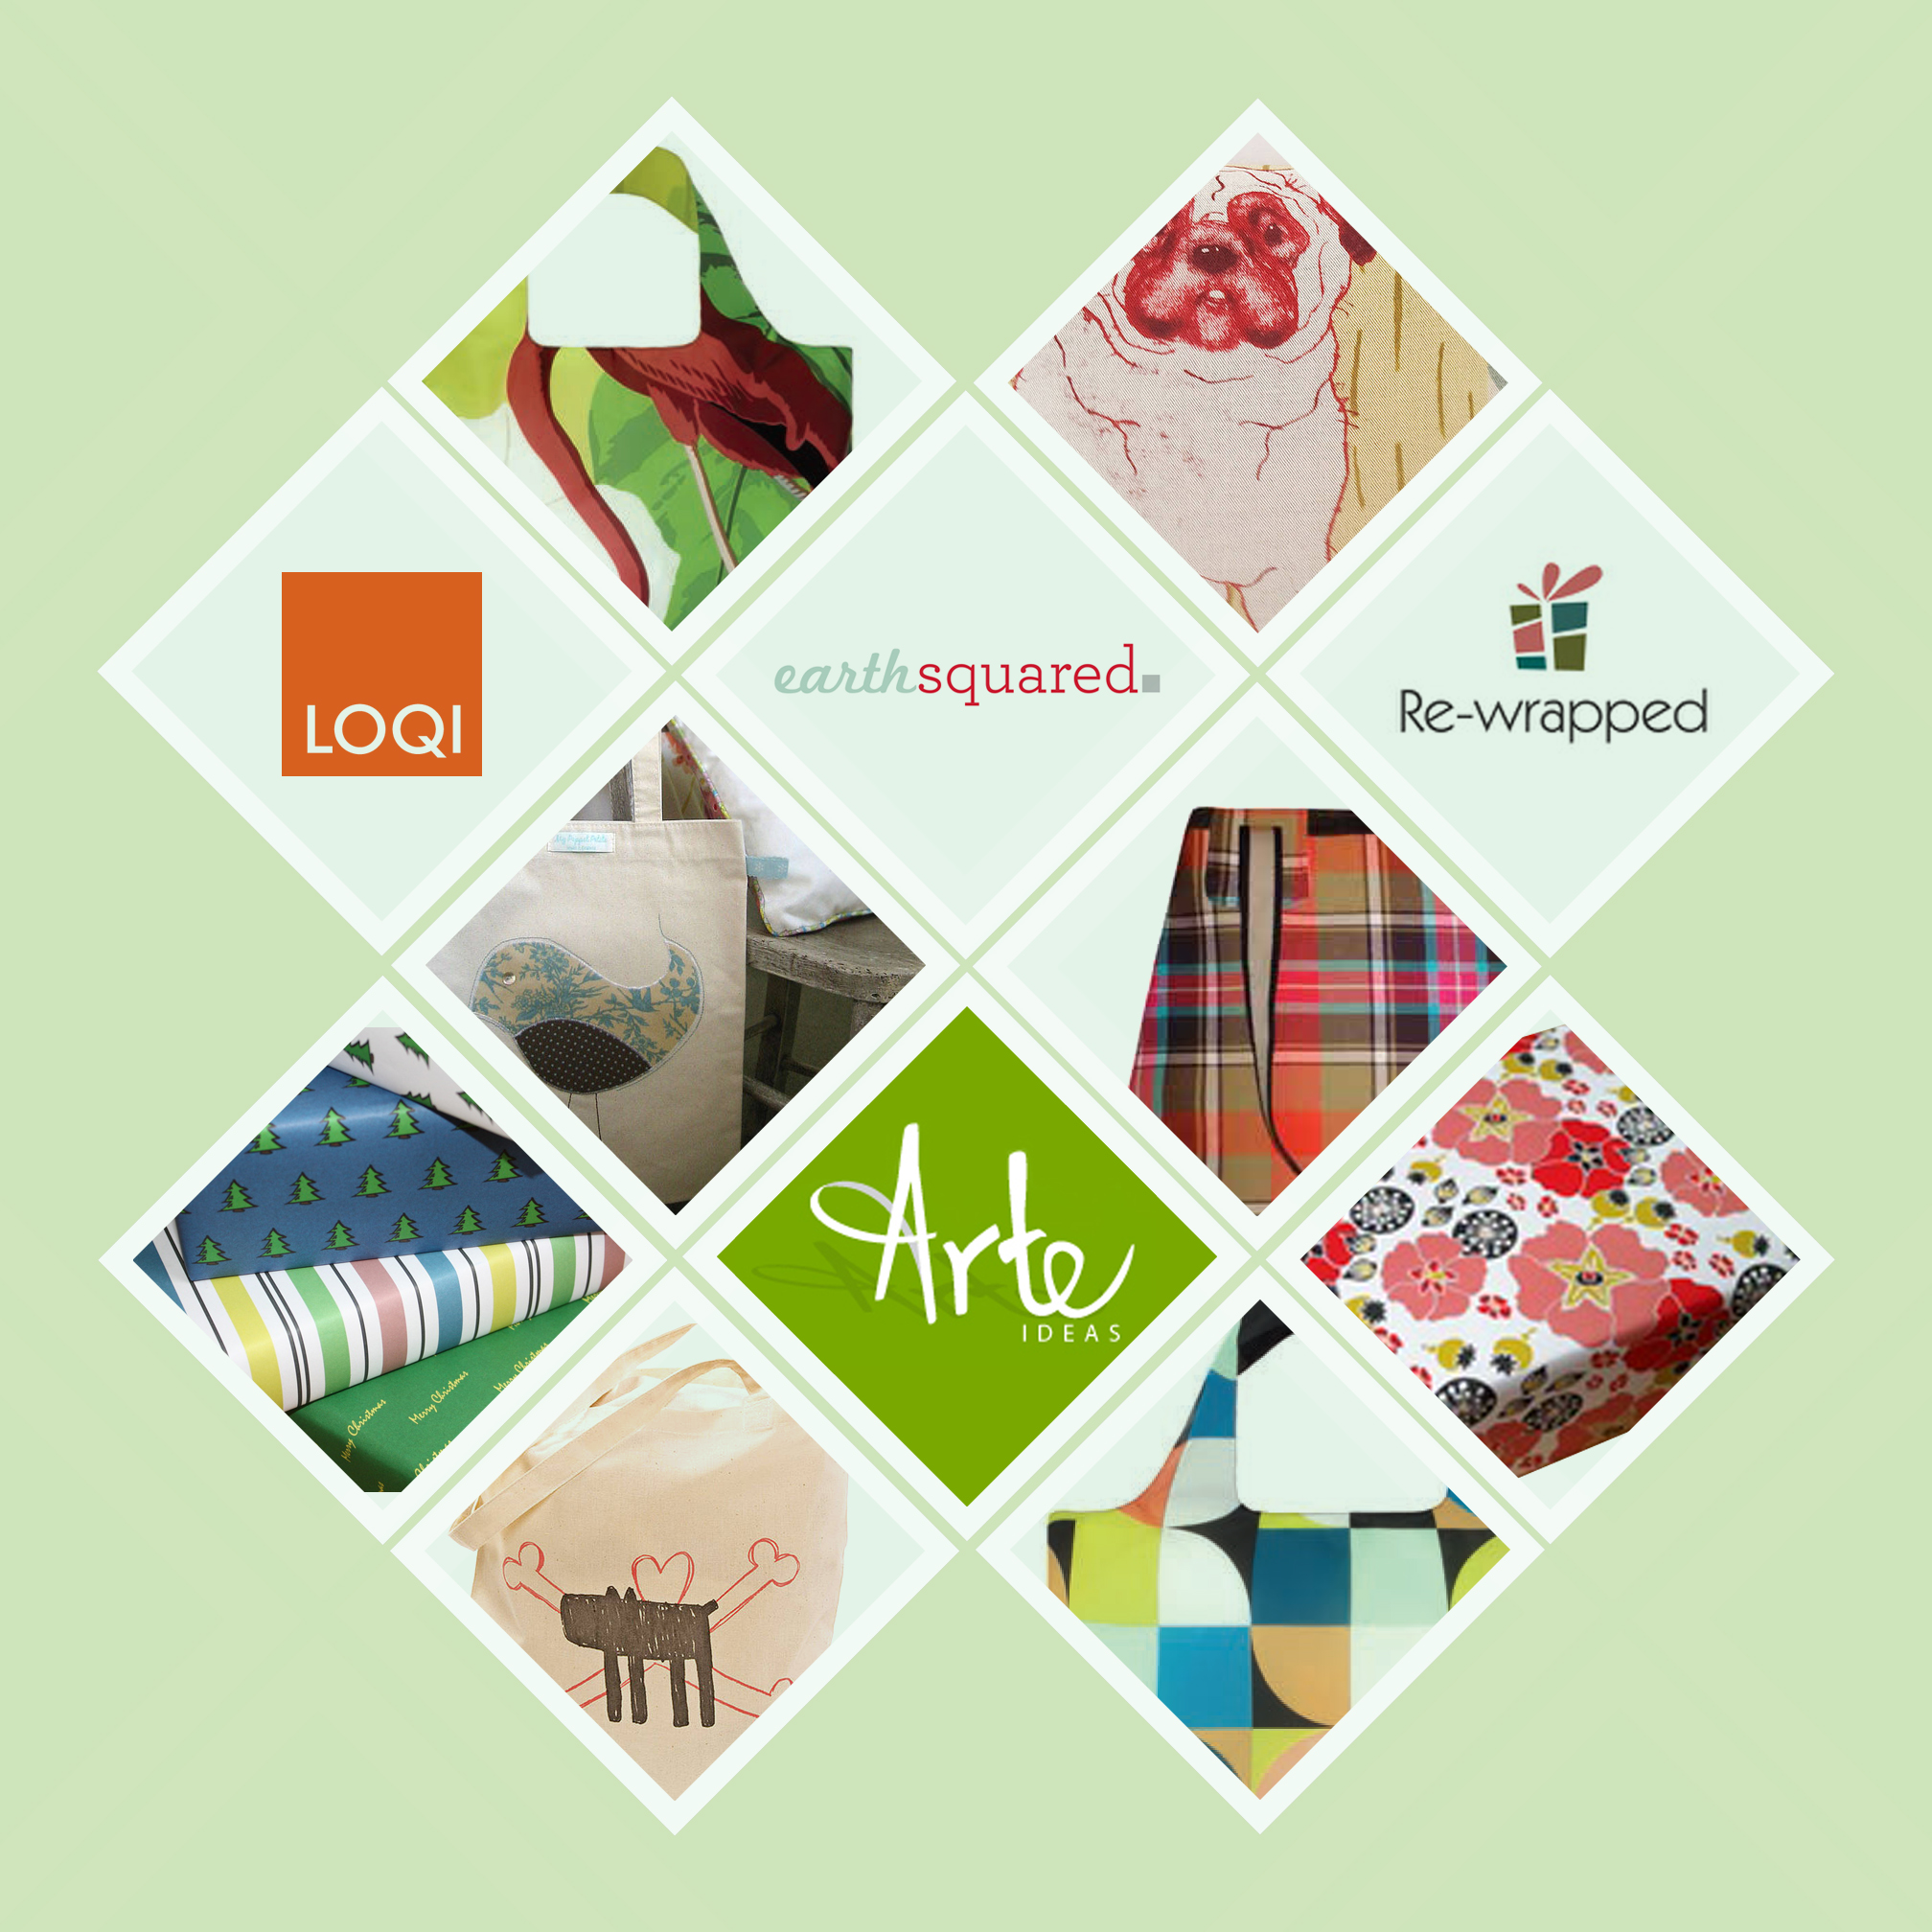 New Eco-Friendly Suppliers at Arte Ideas